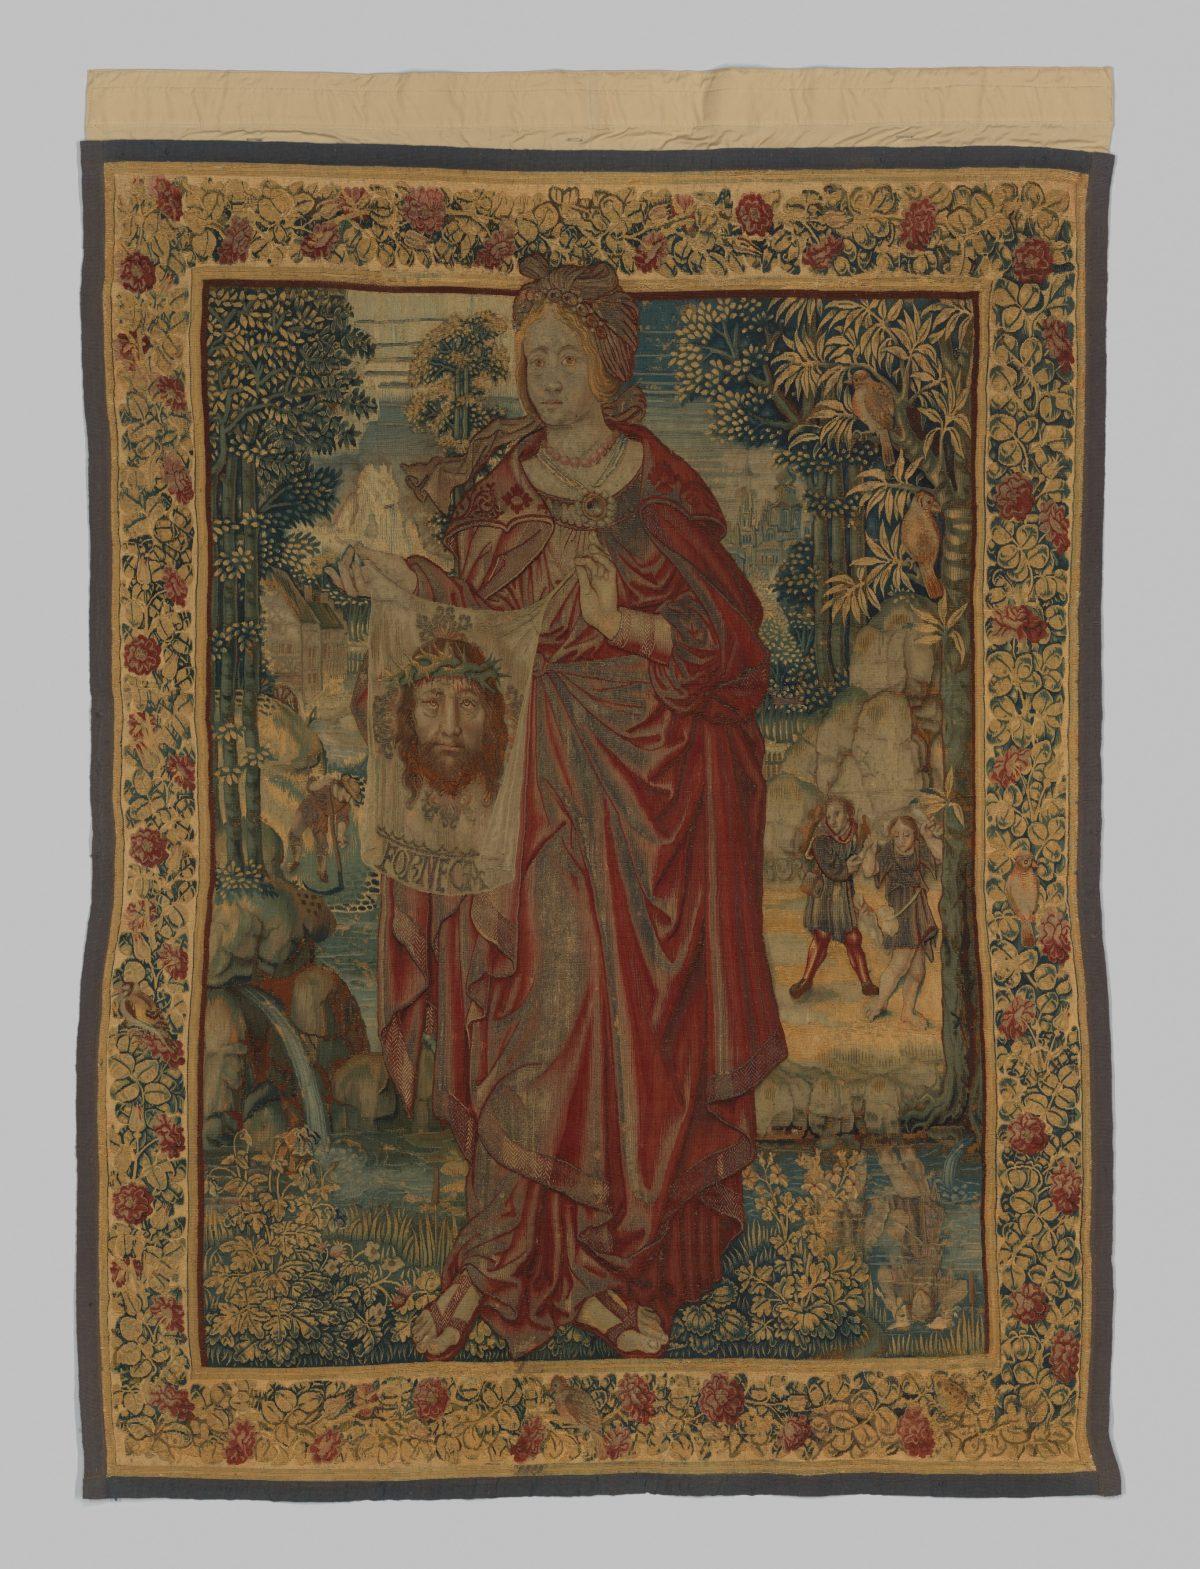 In contrast to the bottom-up cup, the “Saint Veronica” tapestry was worth 52 cows. Circa 1525. Wool, silk, gilded silver metal-wrapped threads, 5 feet 8 inches by 4 feet 3 inches. Bequest of George Blumenthal, 1941. (The Metropolitan Museum of Art)